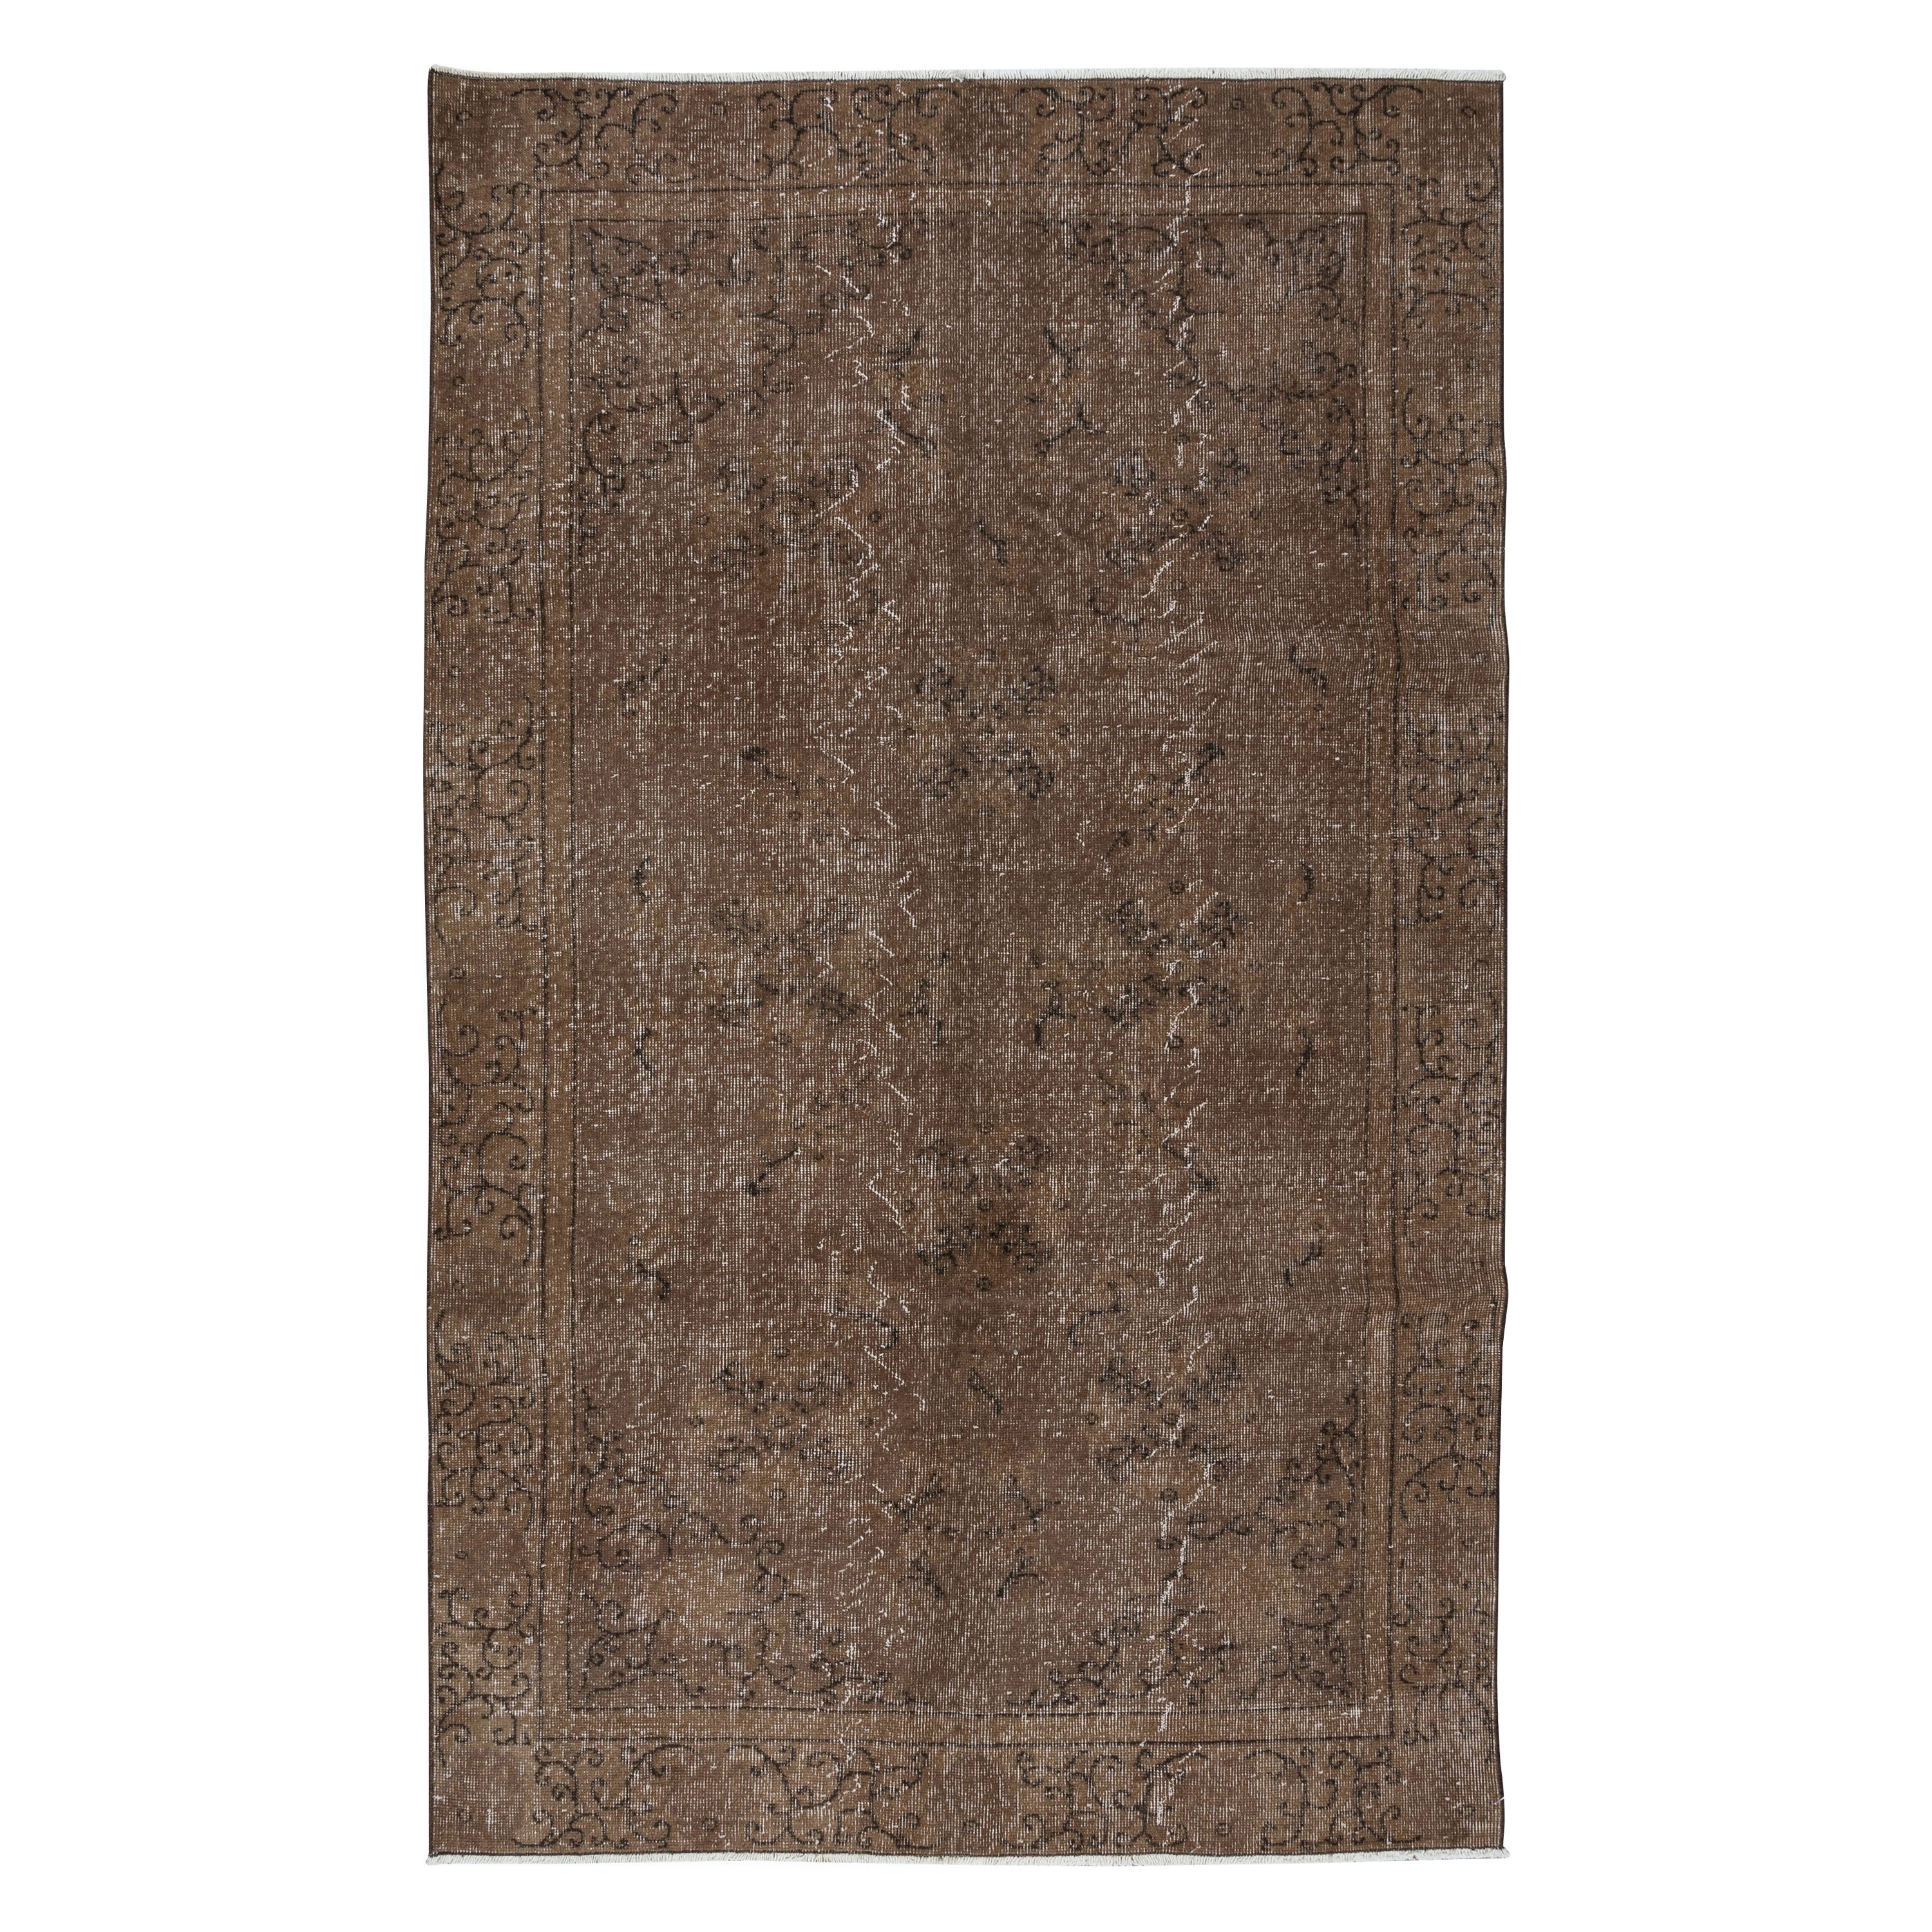 5.2x8.5 Ft Handmade Turkish Rug Re-Dyed in Brown for Modern Living Room Decor